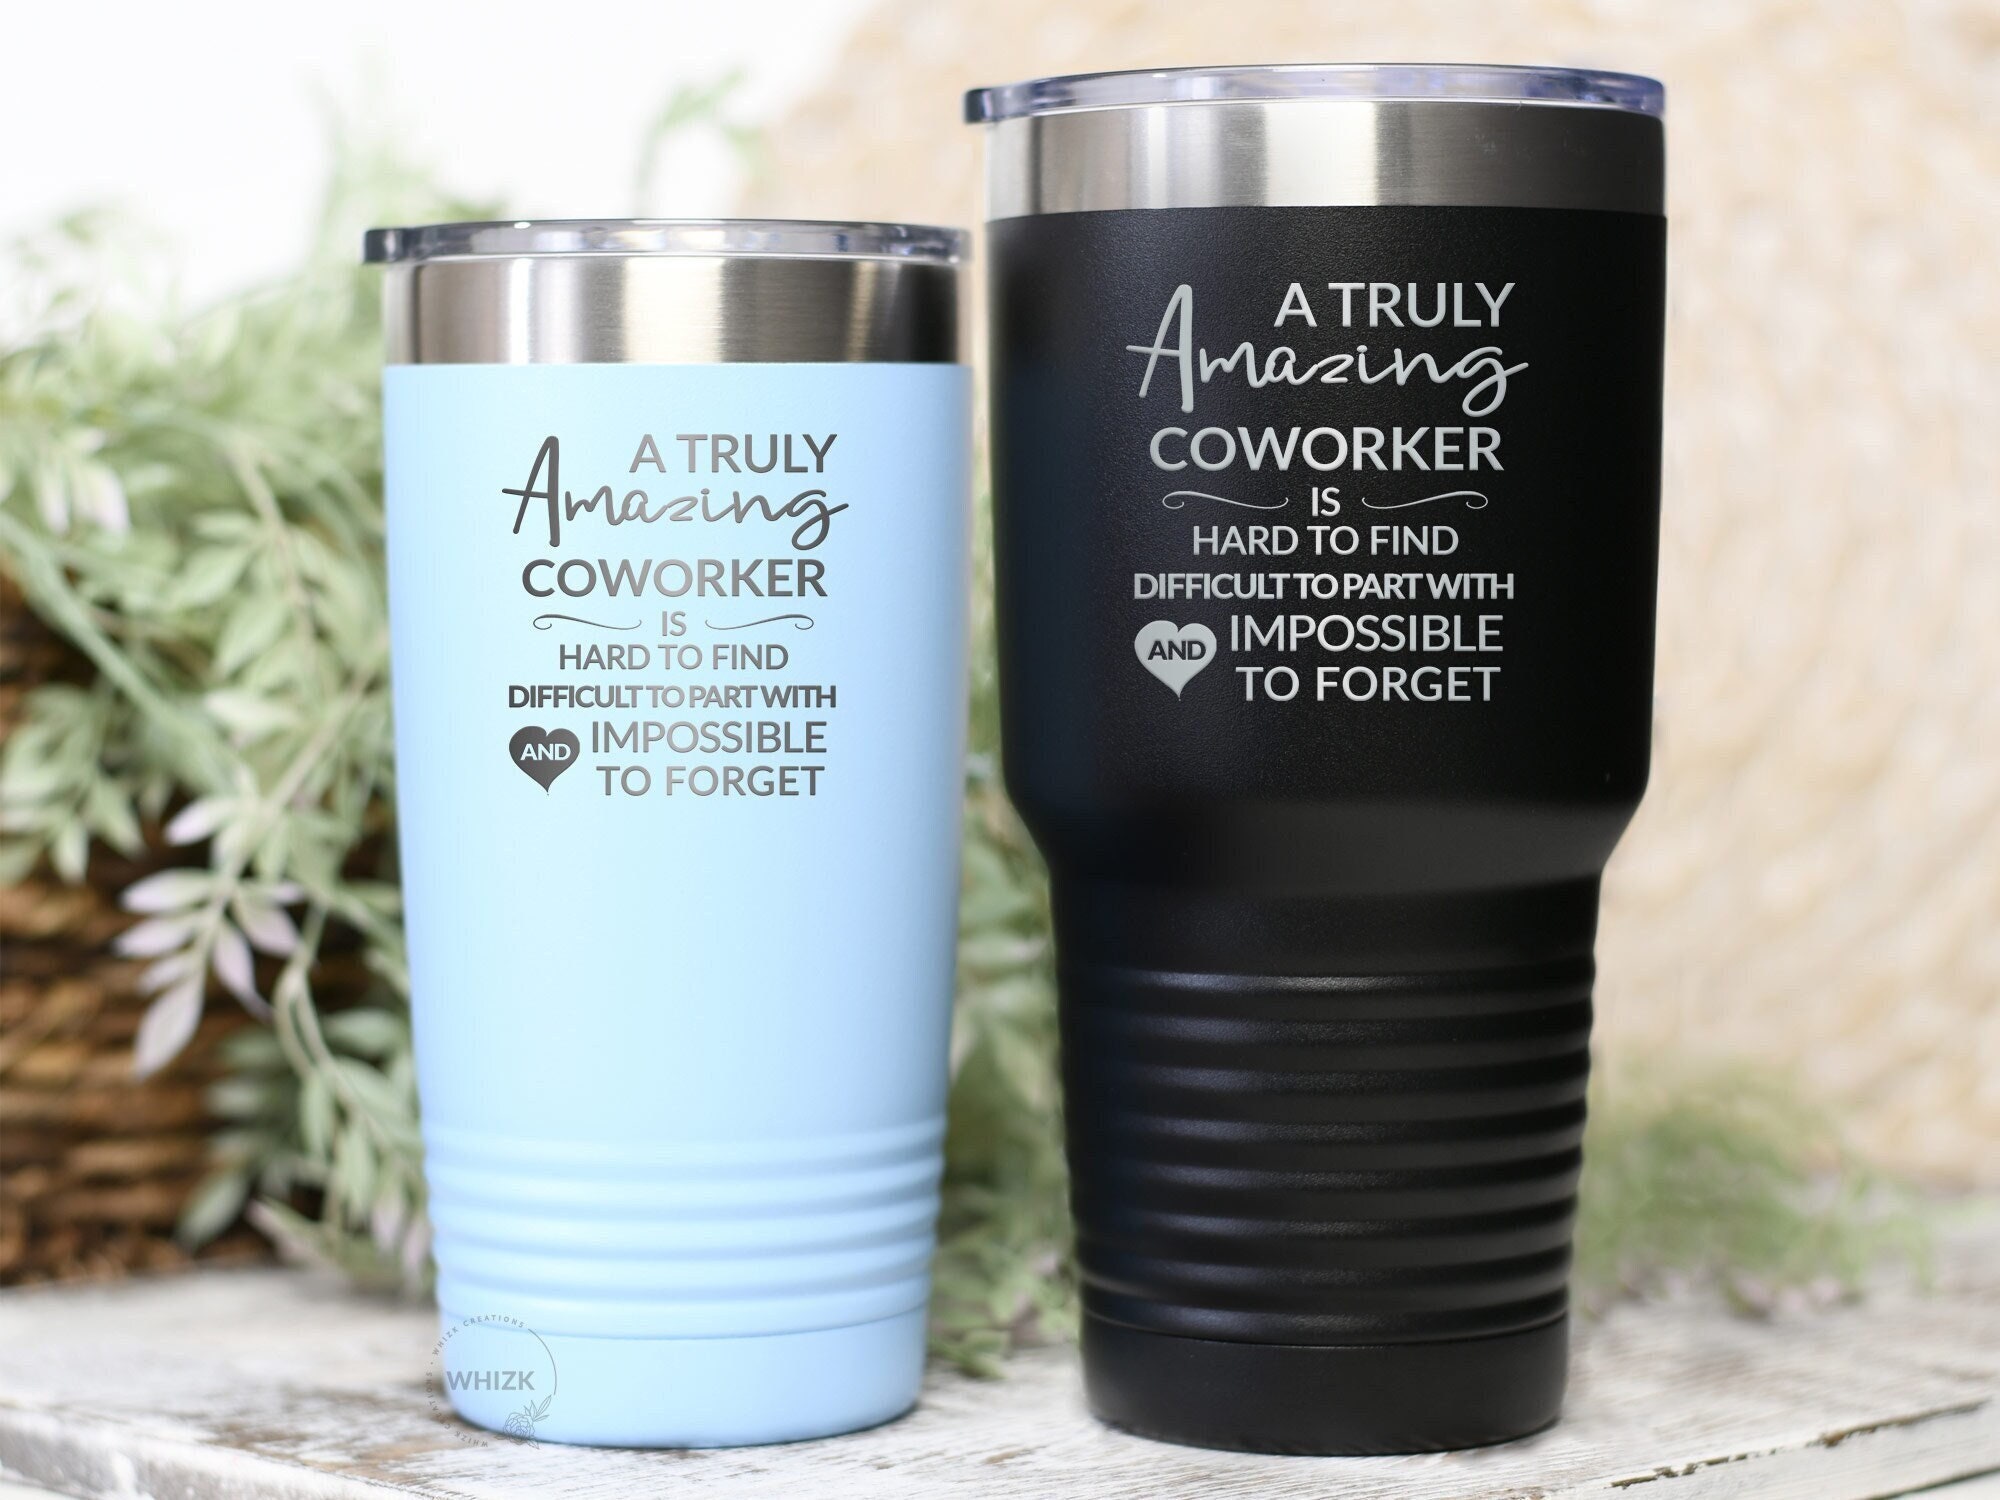 35th Birthday Tumbler, Funny Hot Drink Holder for 35 Year Olds, Gift for  Coworker, Present for Sister, Brother 